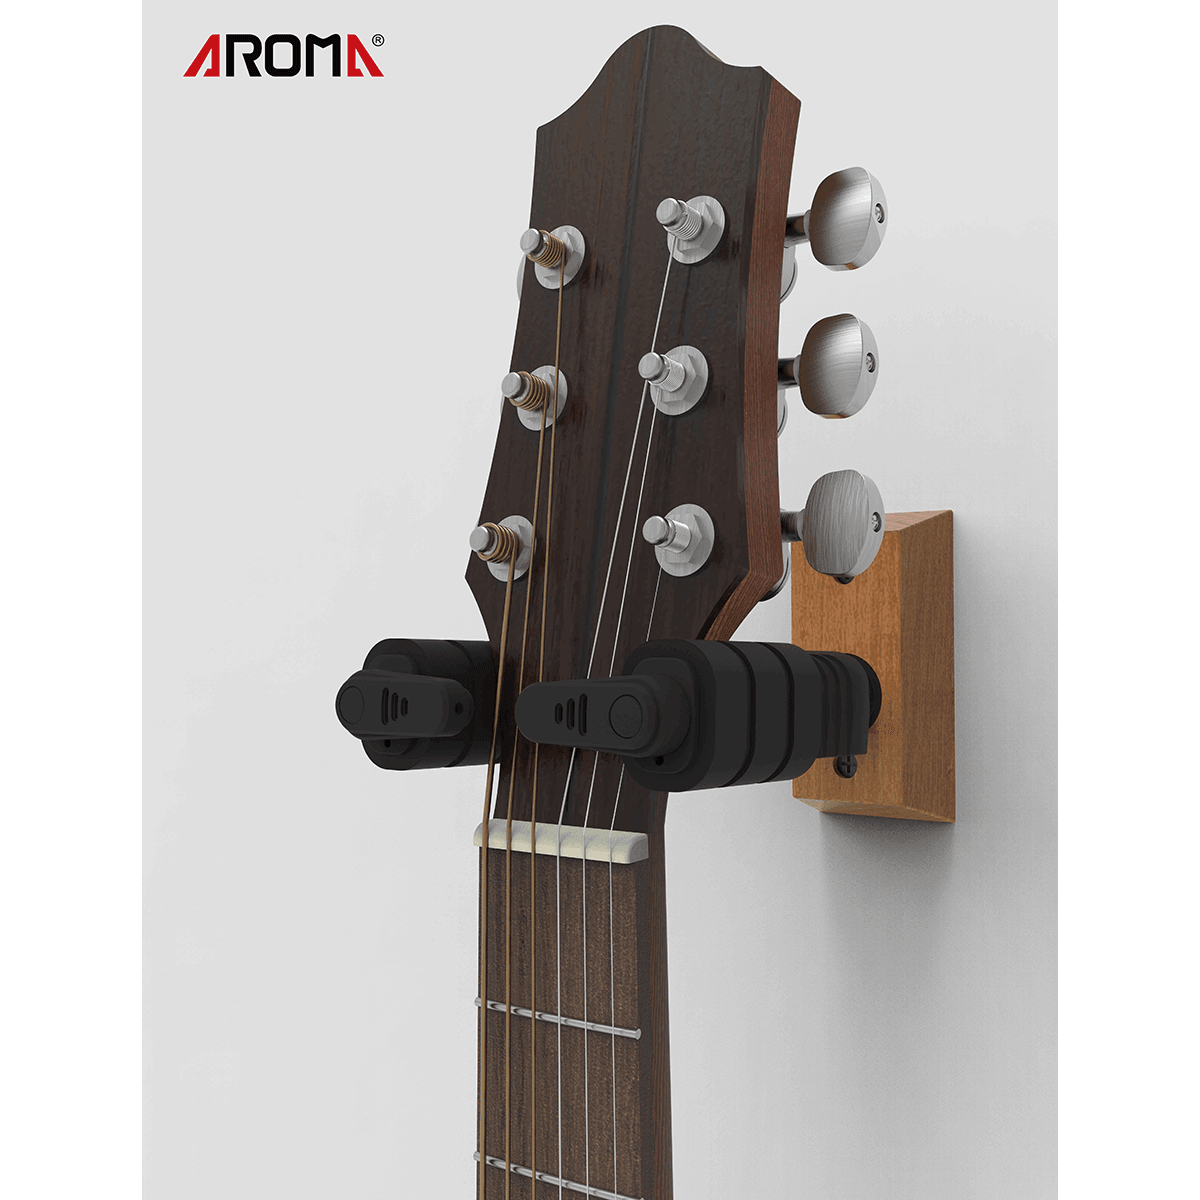 Aroma Wood Locking Guitar Hanger - Accessories by Aroma at Muso's Stuff